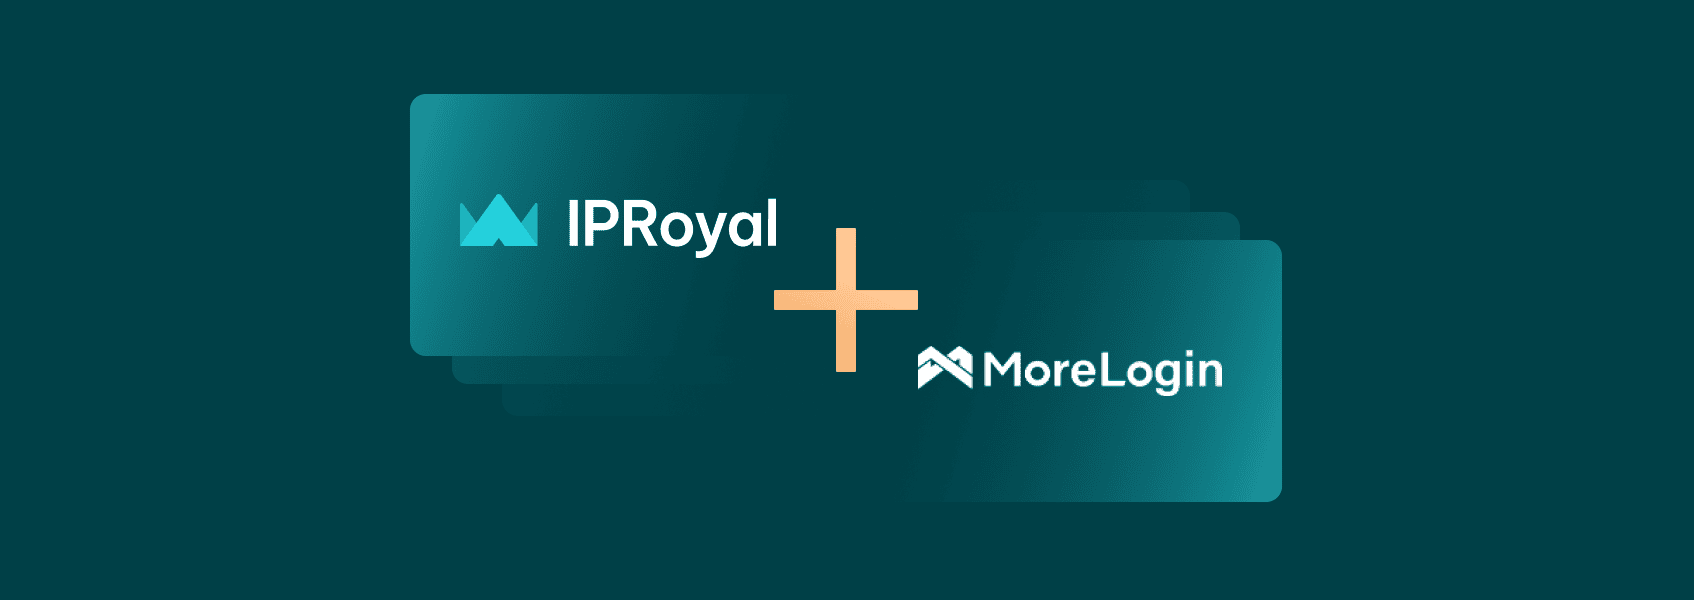 How to Set Up a MoreLogin Proxy with IPRoyal